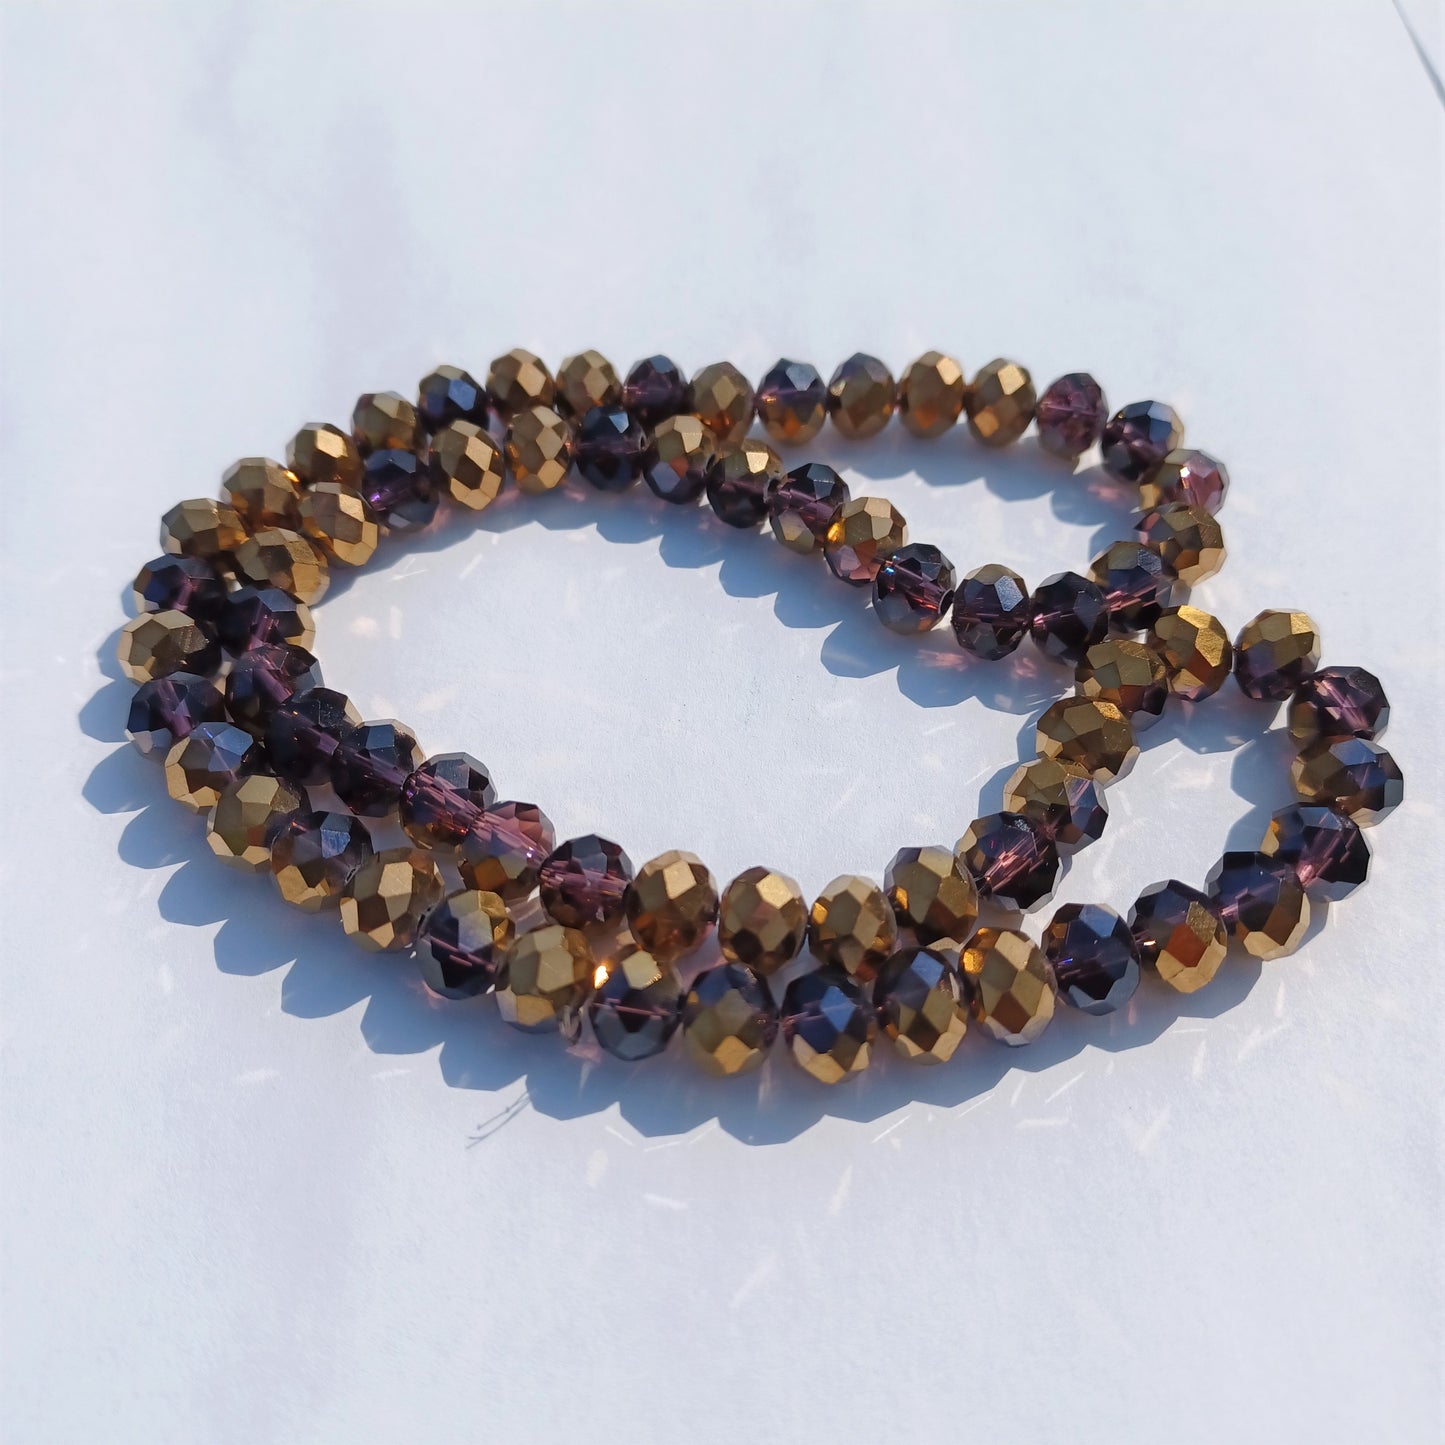 Chinese Crystal Beads Rondelle Shape, 8mm X 6mm Amethyst with Gold Plating